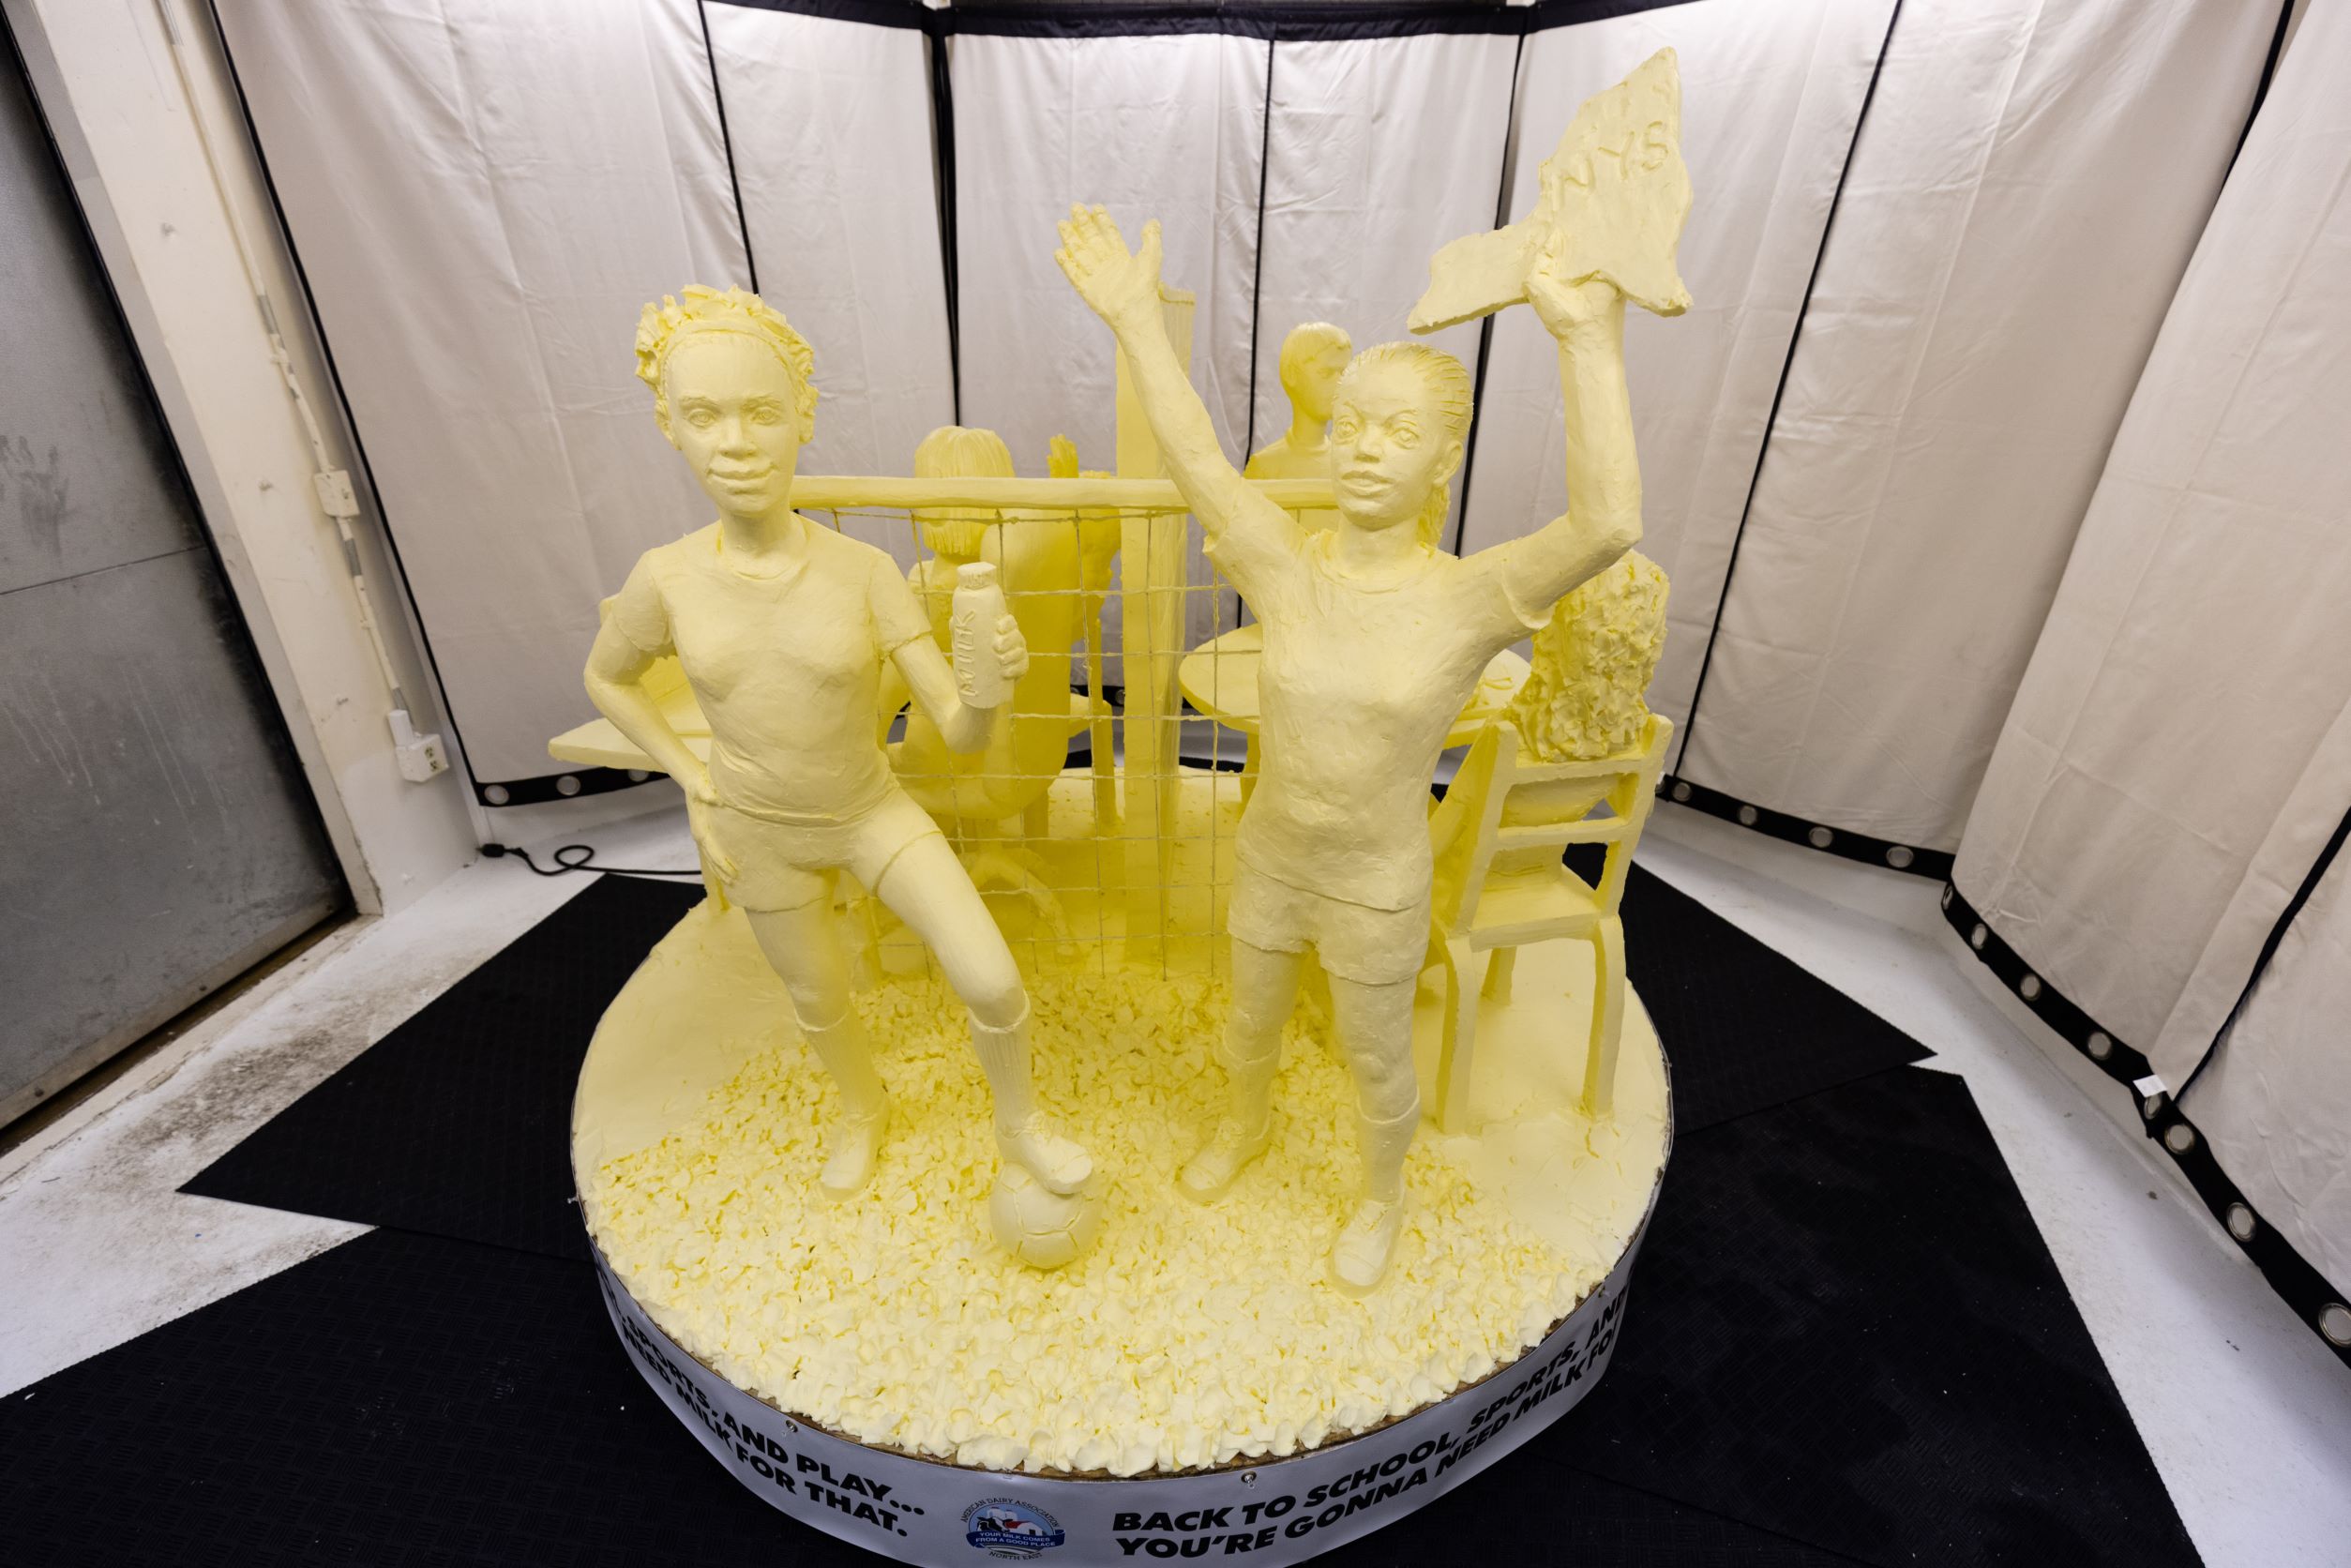 Back to Sports 2021 New York State Fair Butter Sculpture